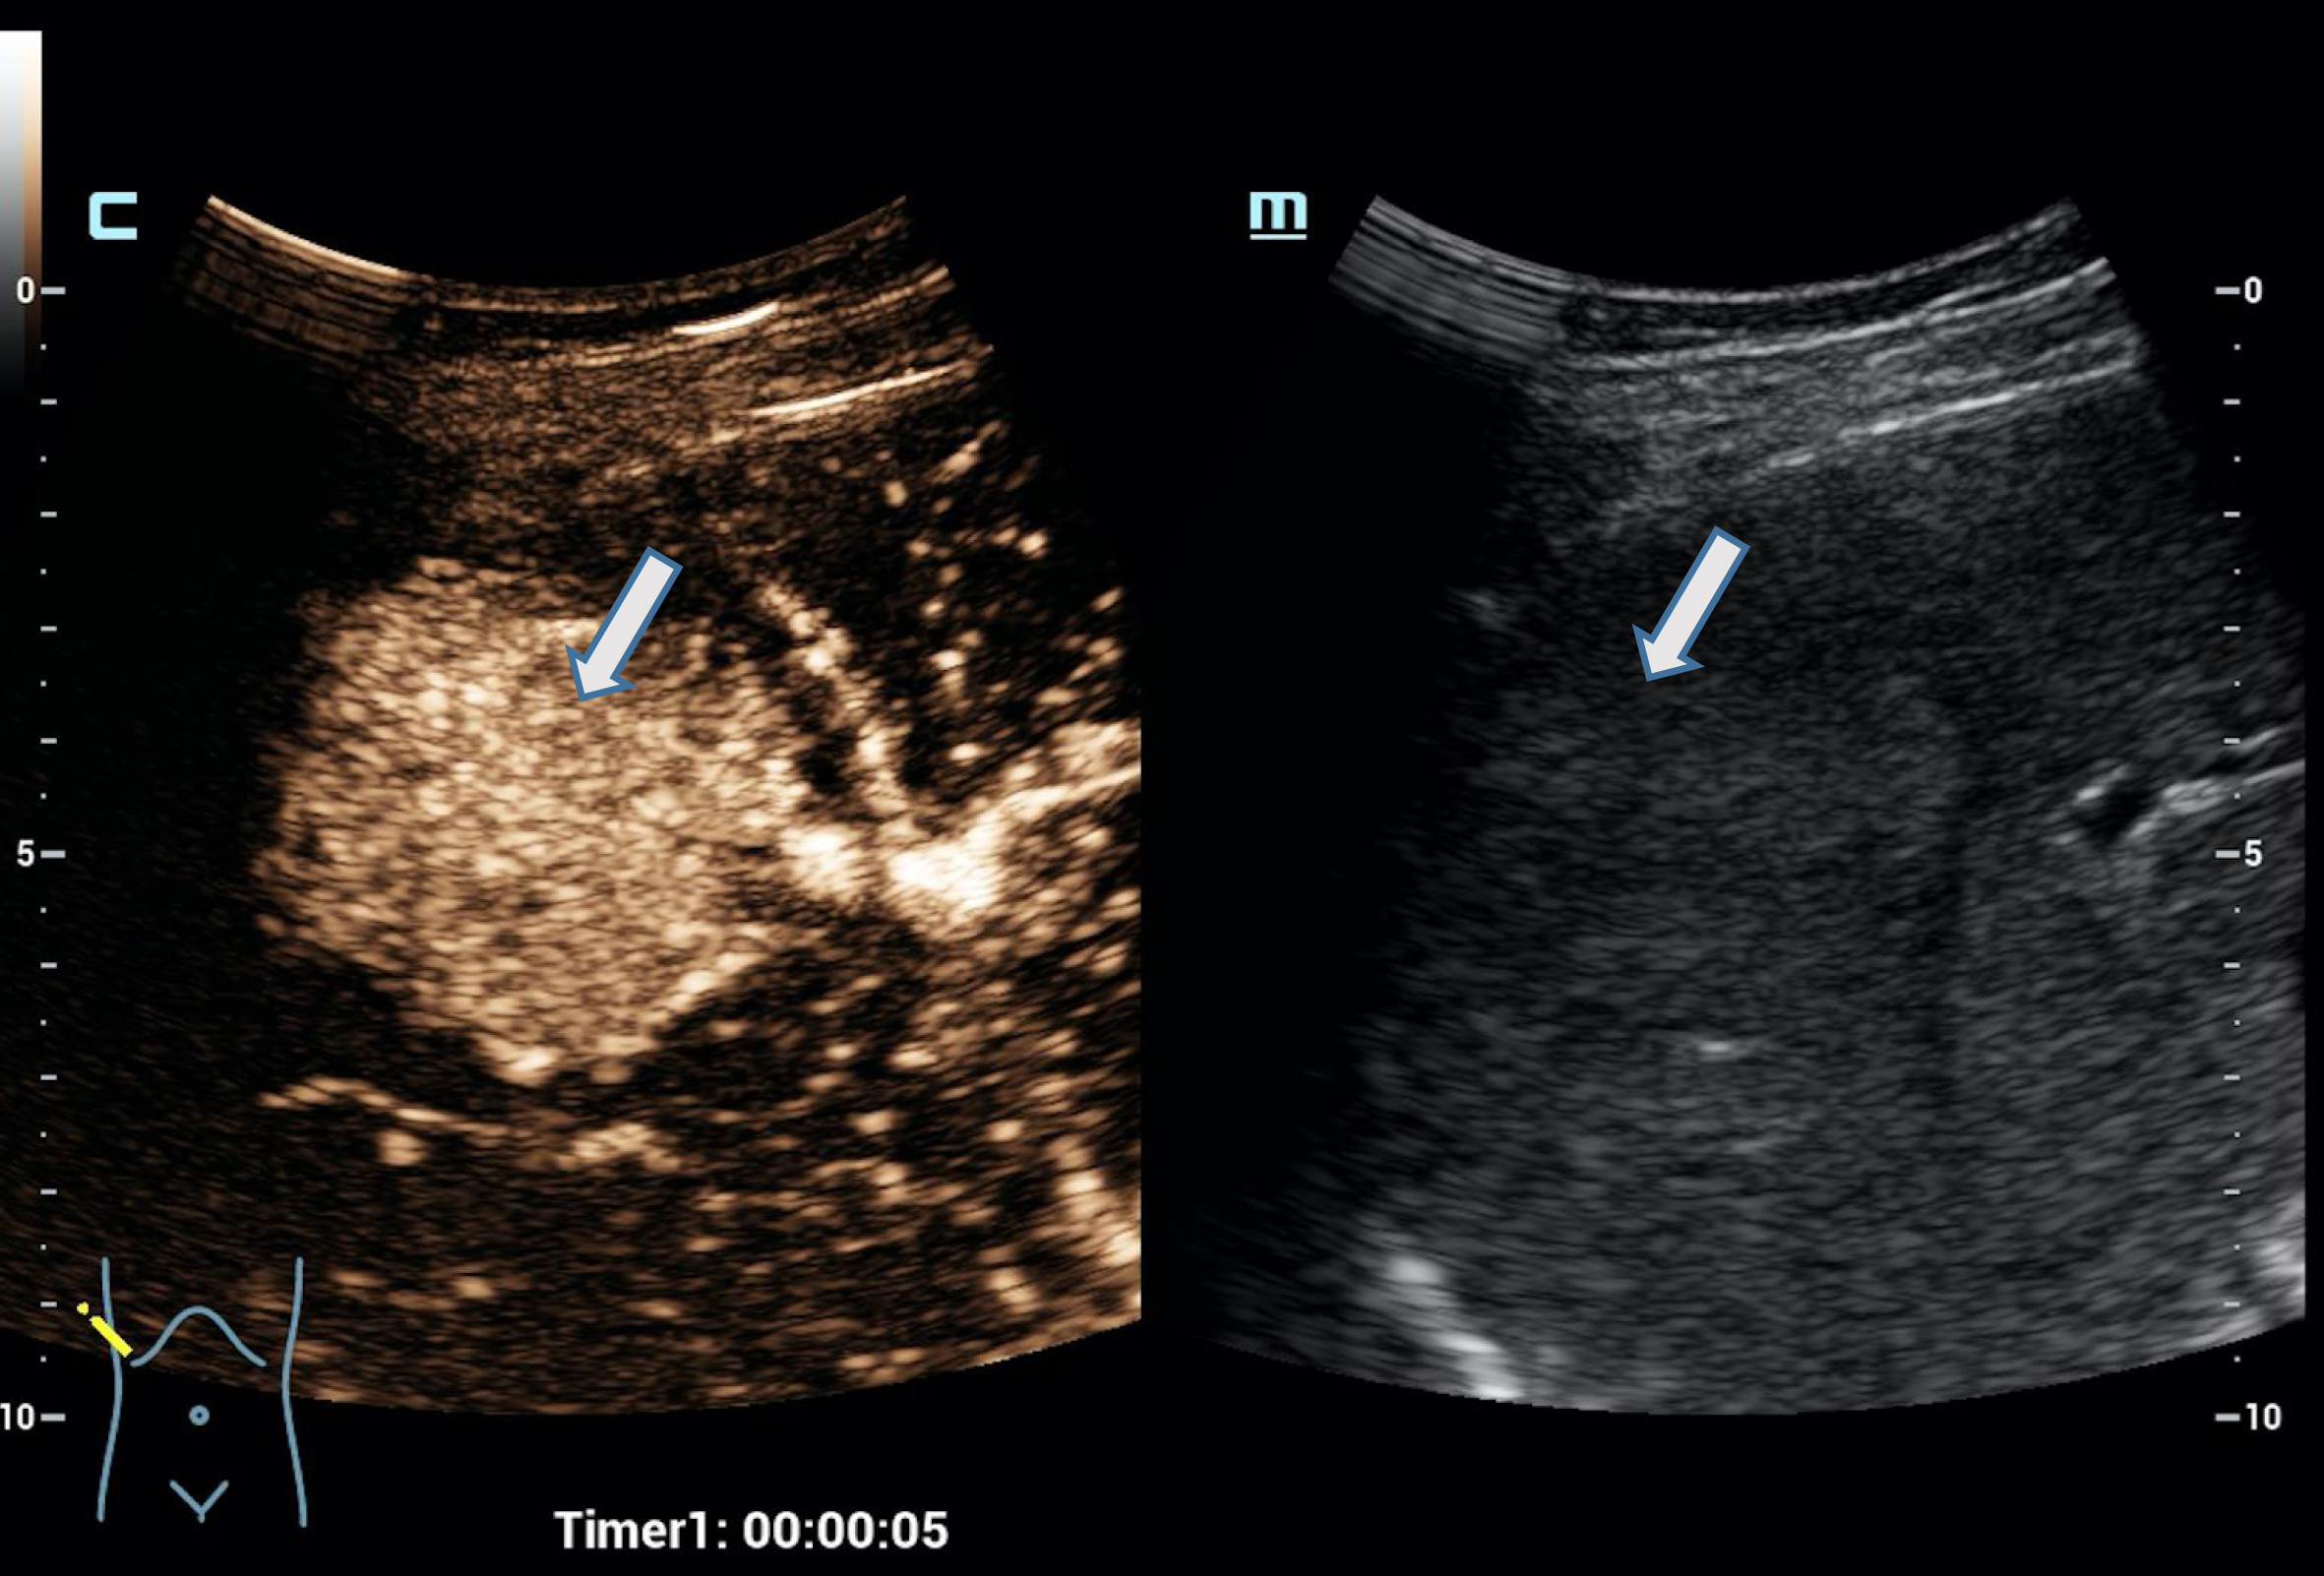 Case of a 34 years old female patient with focal nodular hyperplasia (FNH). Detection in the early arterial phase using the HiFR CEUS technology after bolus injection of 1.0 ml ultrasound contrast agent hyperenhancement from the center to the margin (arrow). Excellent visualization by HiFR CEUS. The lesion is difficult to detect on fundamental B-mode (right side).